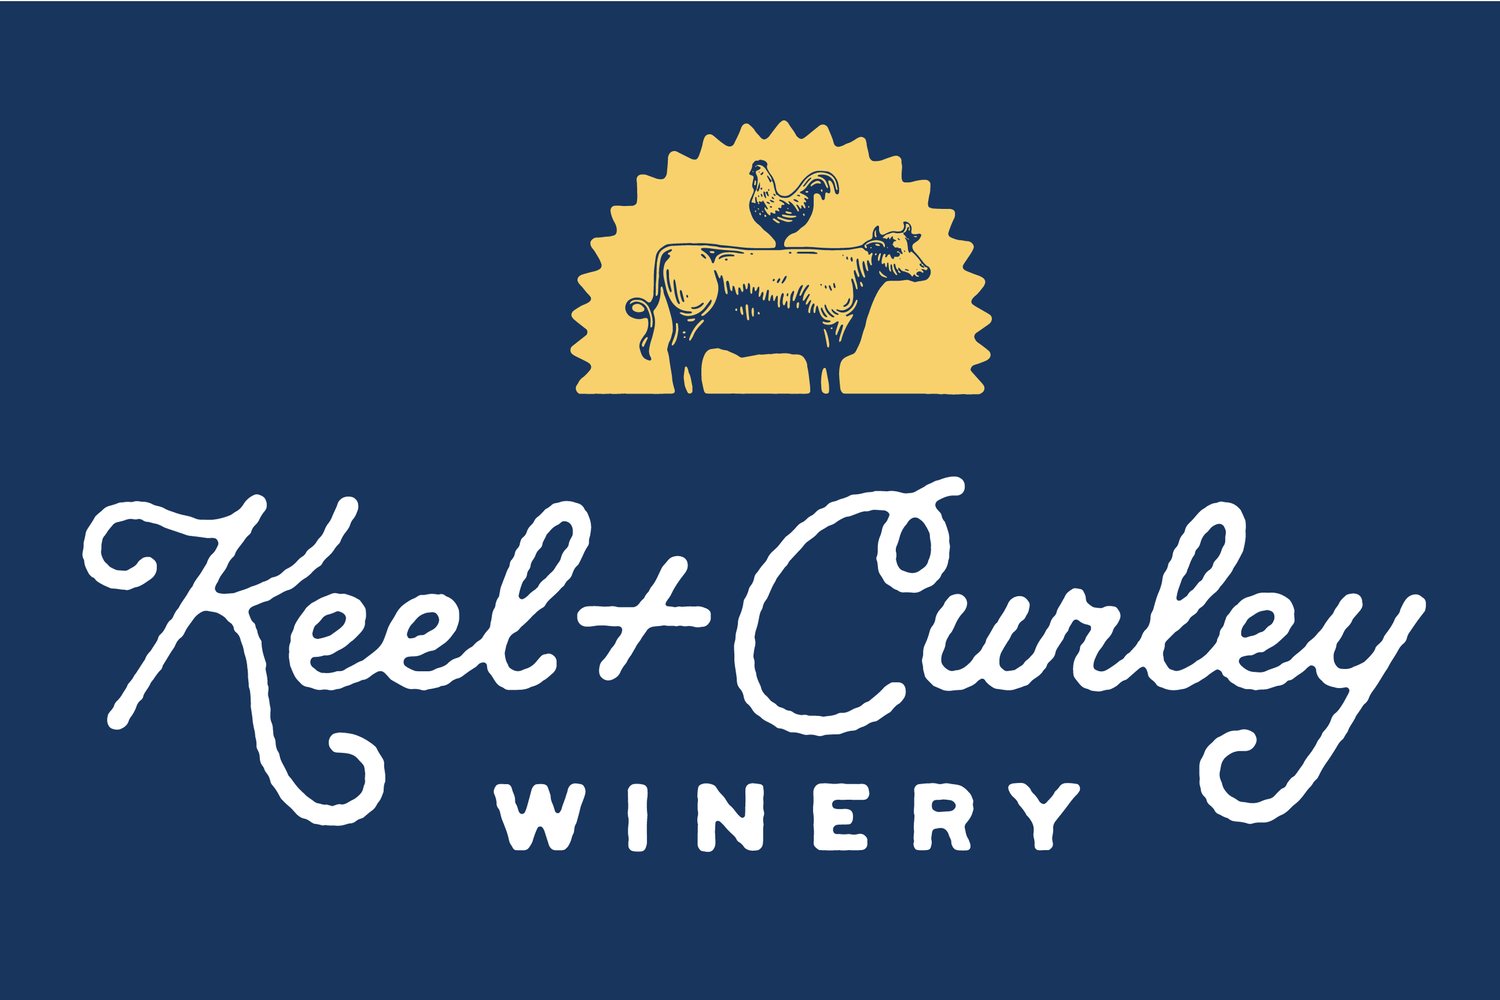 Keel and Curley Winery